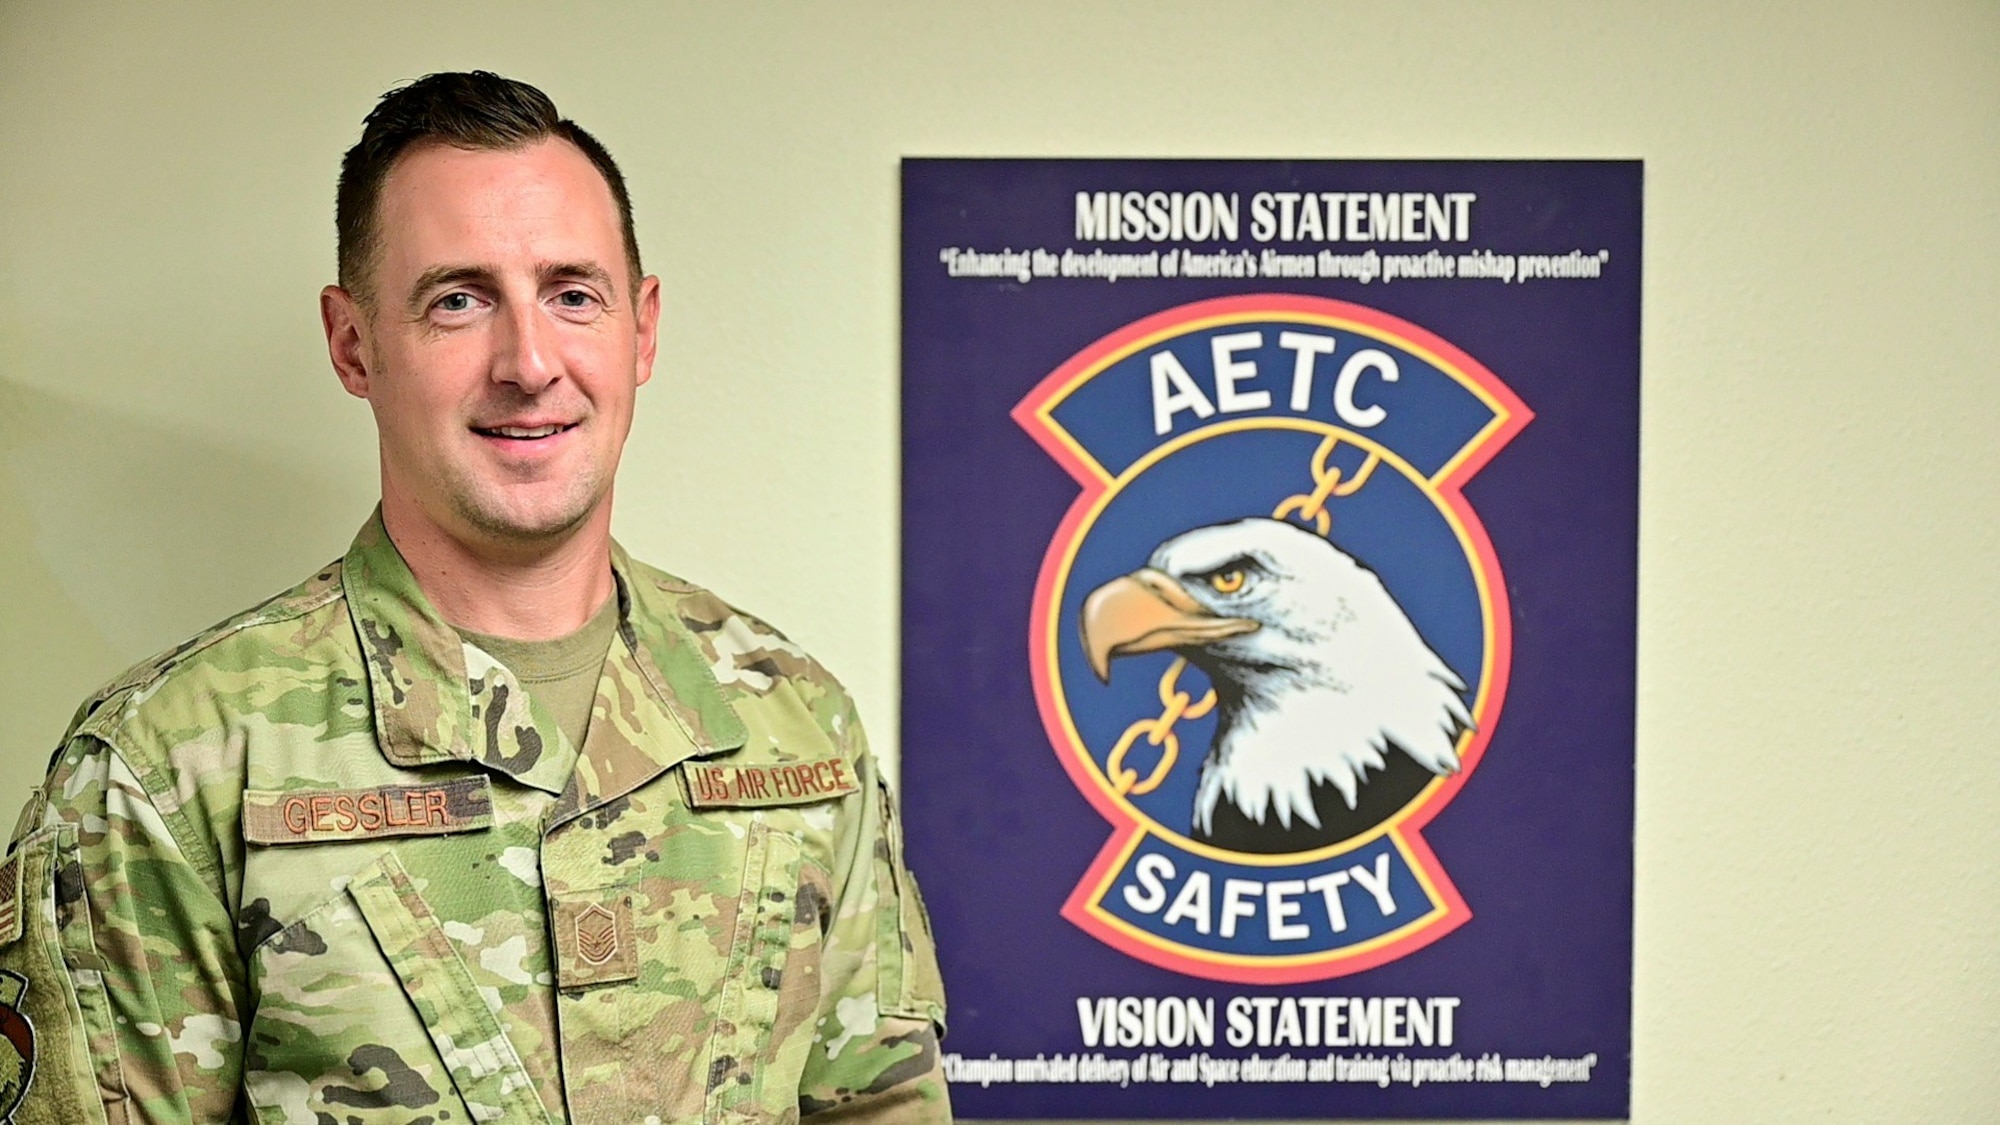 MSgt Gessler poses in front of a AETC Safety sign